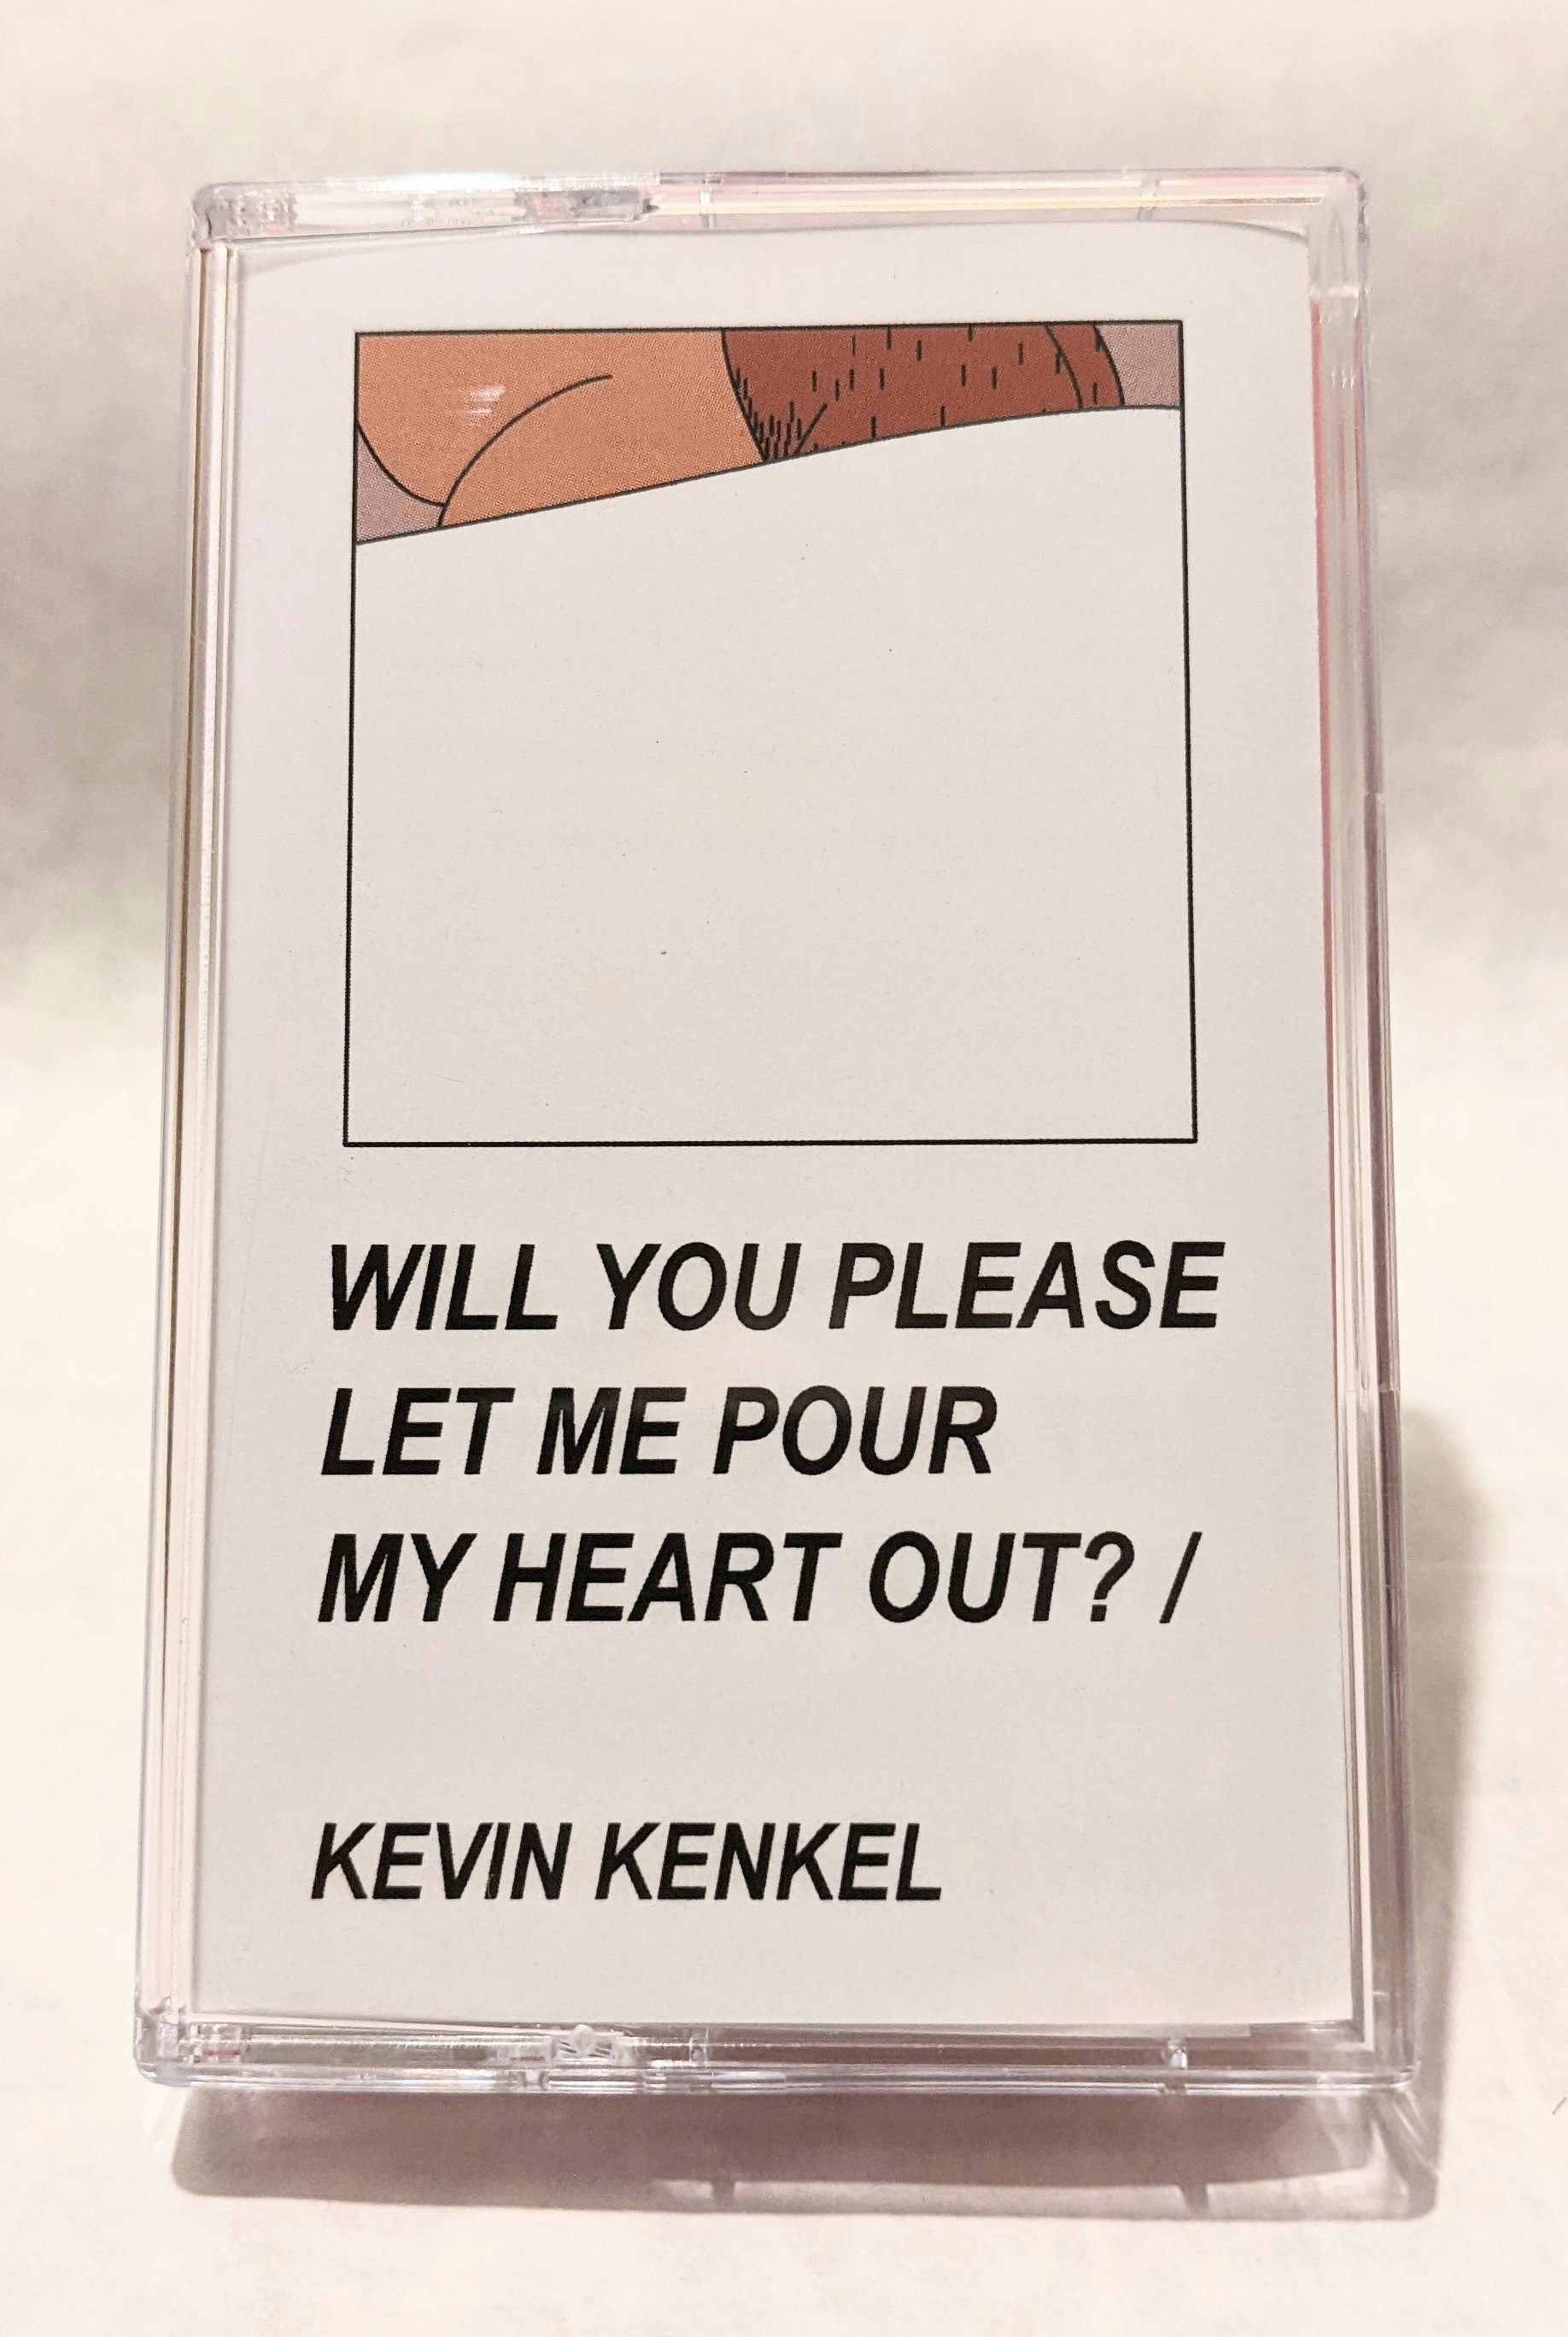 Album artwork for Album artwork for Will You Please Let Me Pour My Heart Out? by Kevin Kenkel by Will You Please Let Me Pour My Heart Out? - Kevin Kenkel